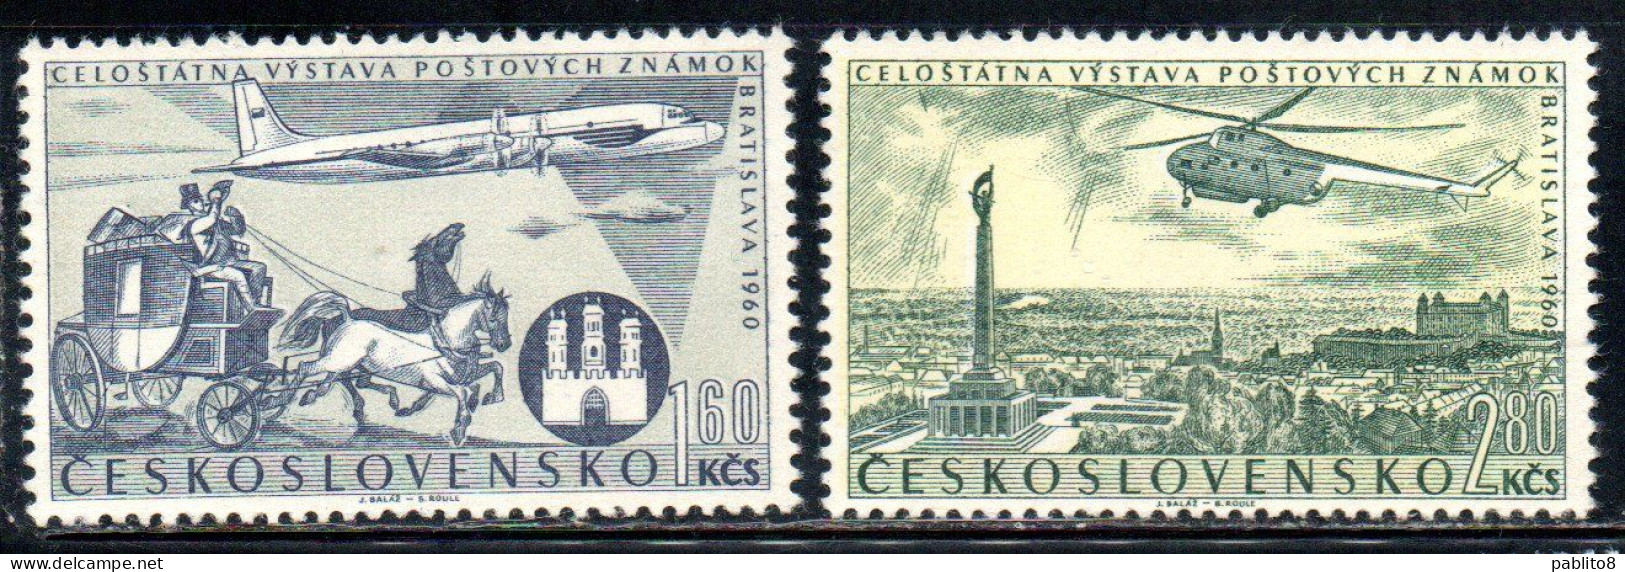 CZECHOSLOVAKIA CECOSLOVACCHIA 1960 AIR POST MAIL AIRMAIL NATIONAL STAMP EXHIBITION COMPLETE SET SERIE COMPLETA MNH - Posta Aerea